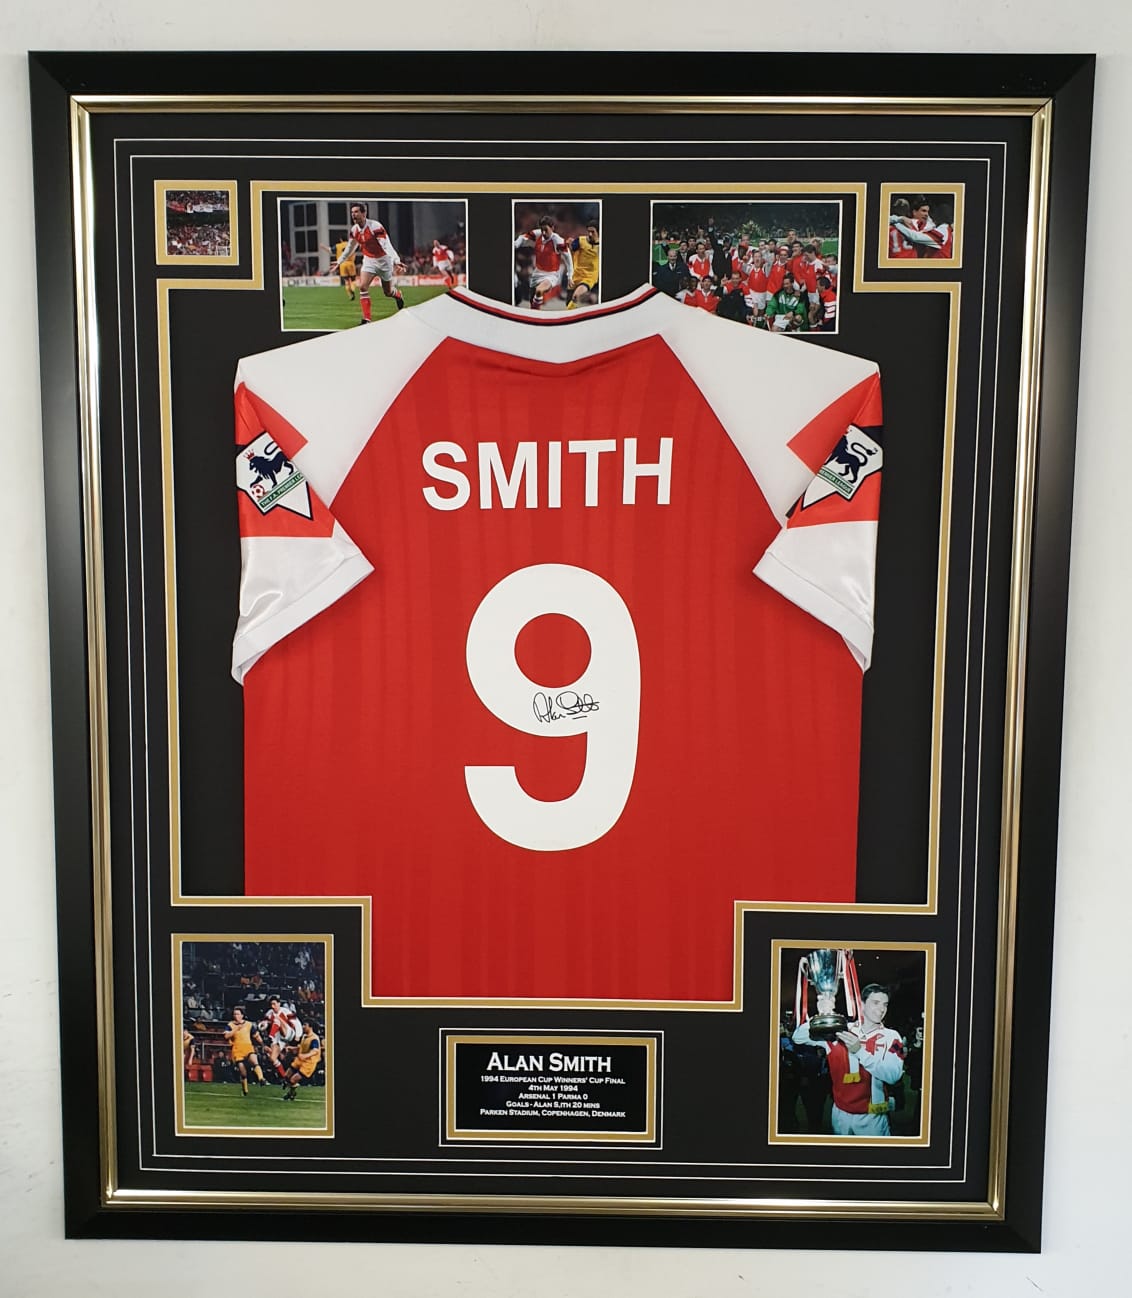 ARSENAL SIGNED ALAN SMITH SIGNED JERSEY